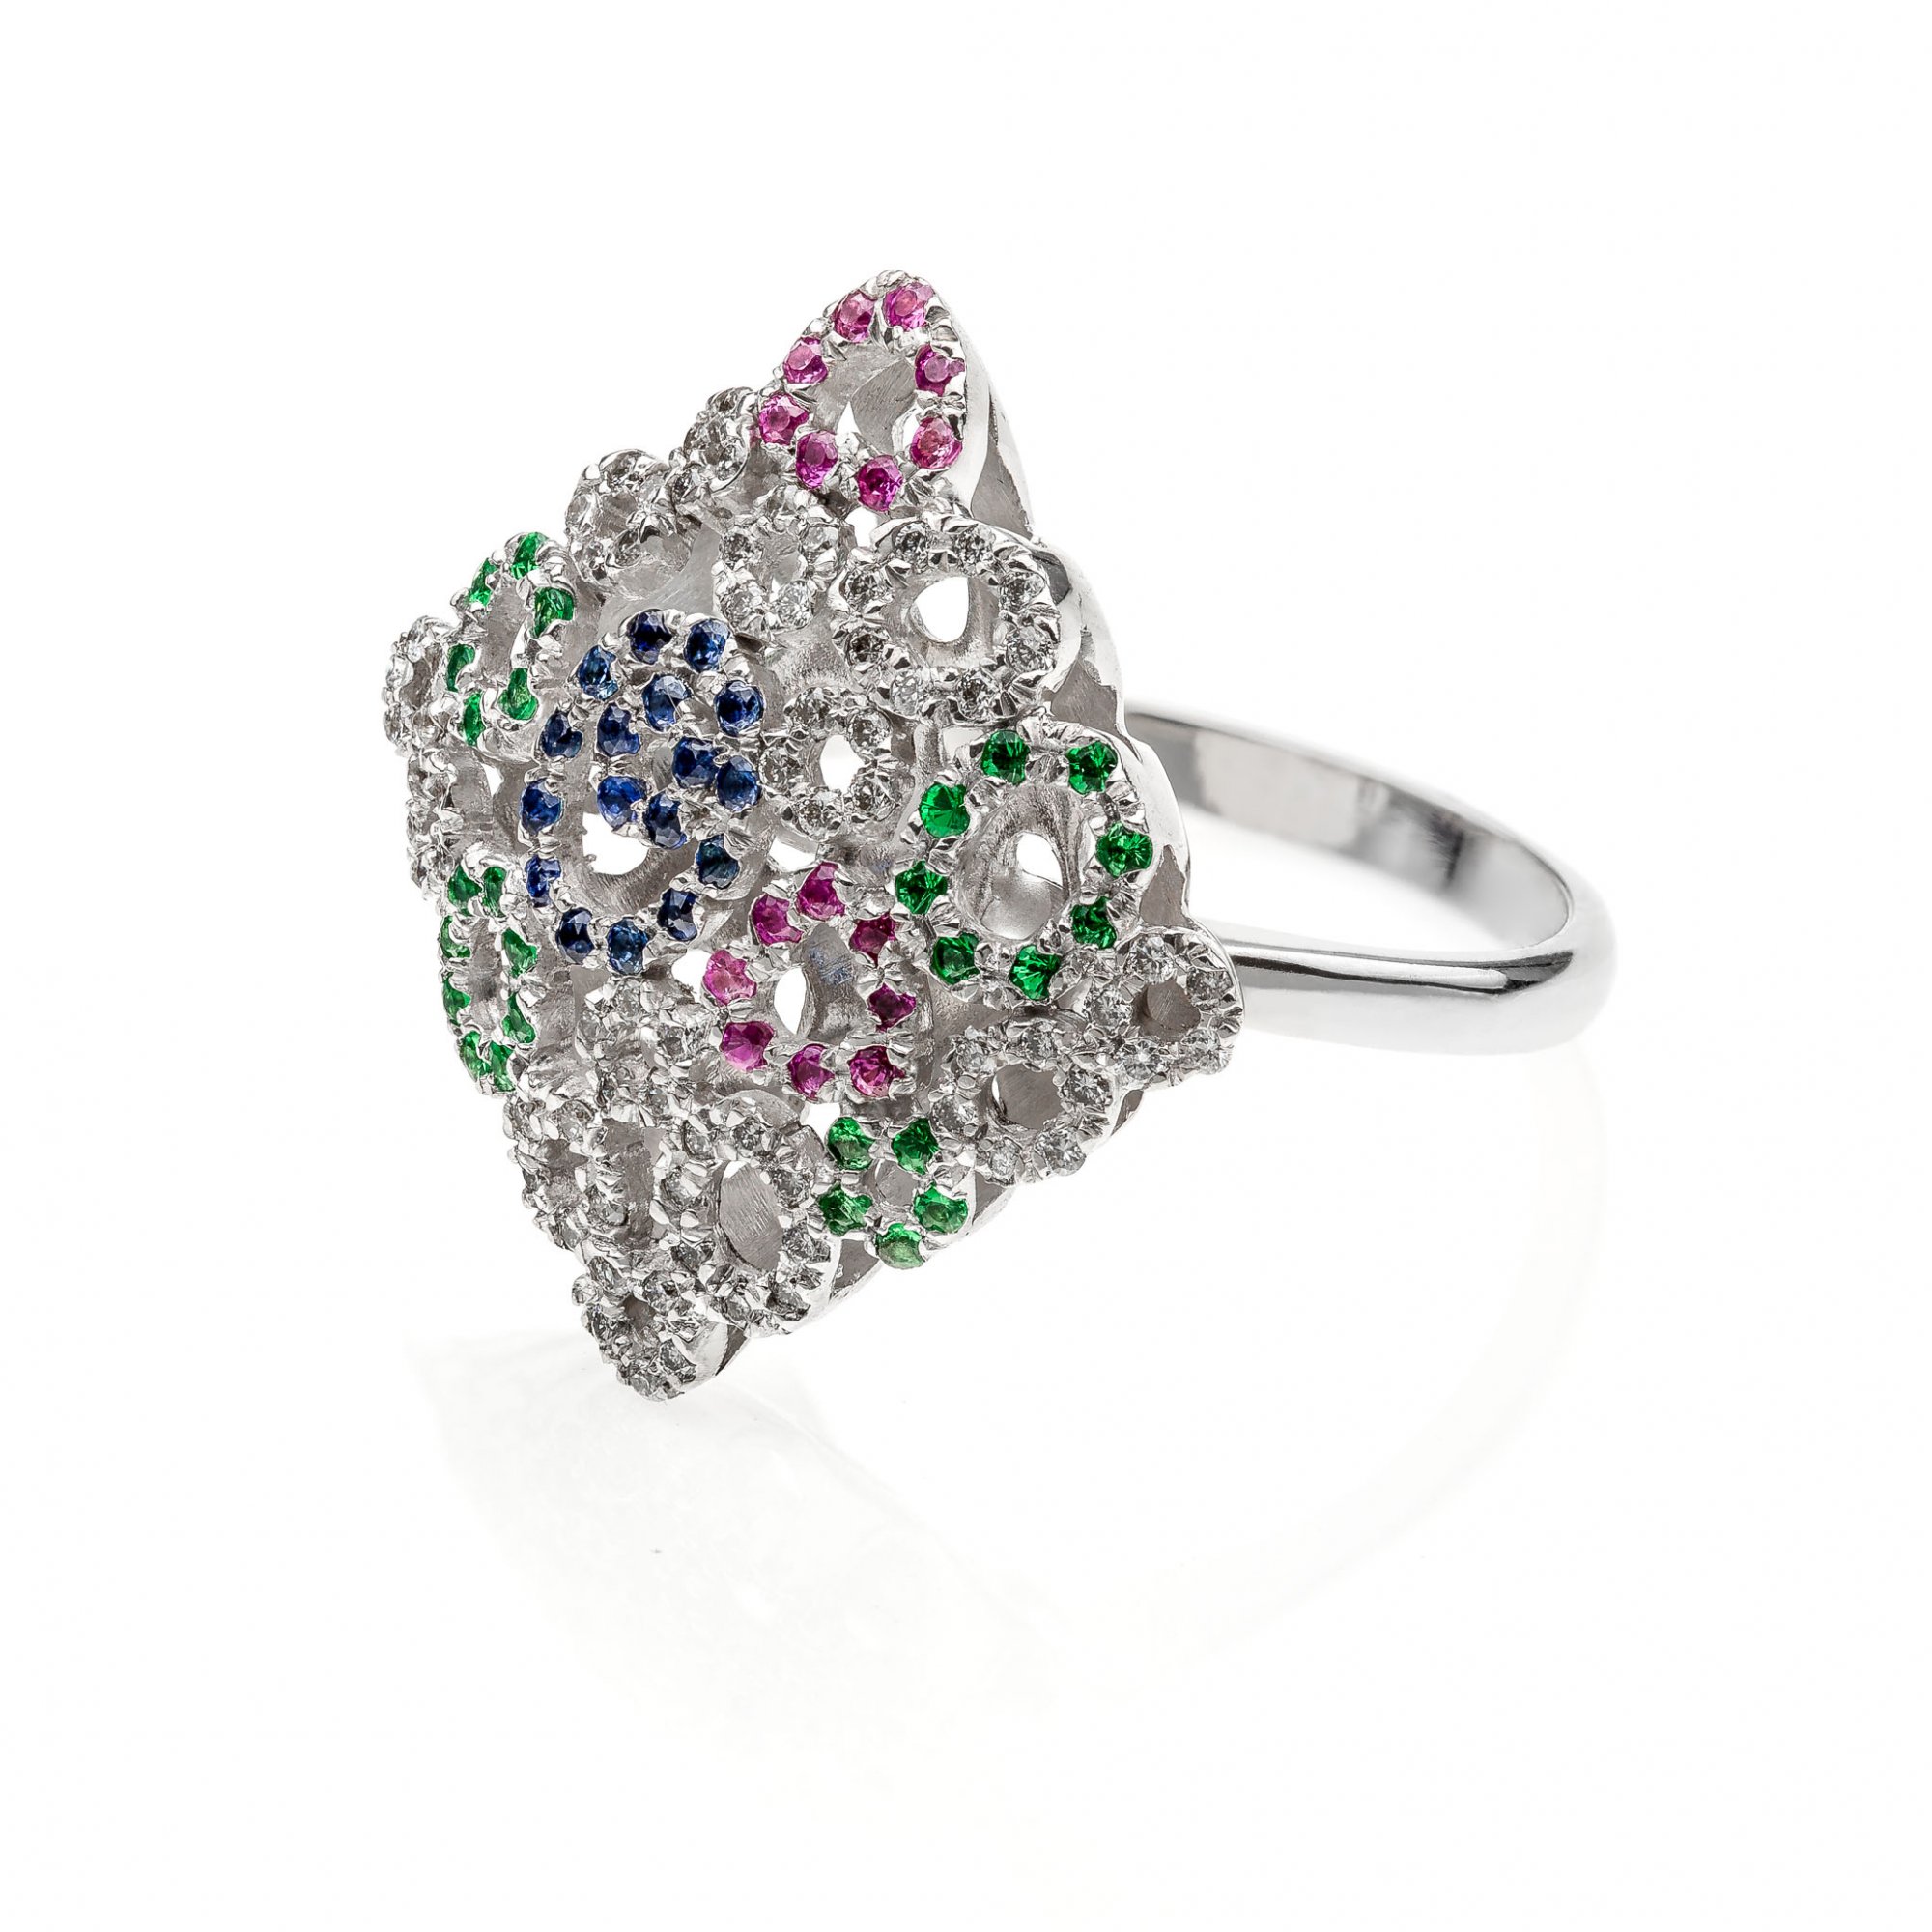 18 KT white gold ring with sapphires,rubys,emeralds and round brilliant cut diamonds